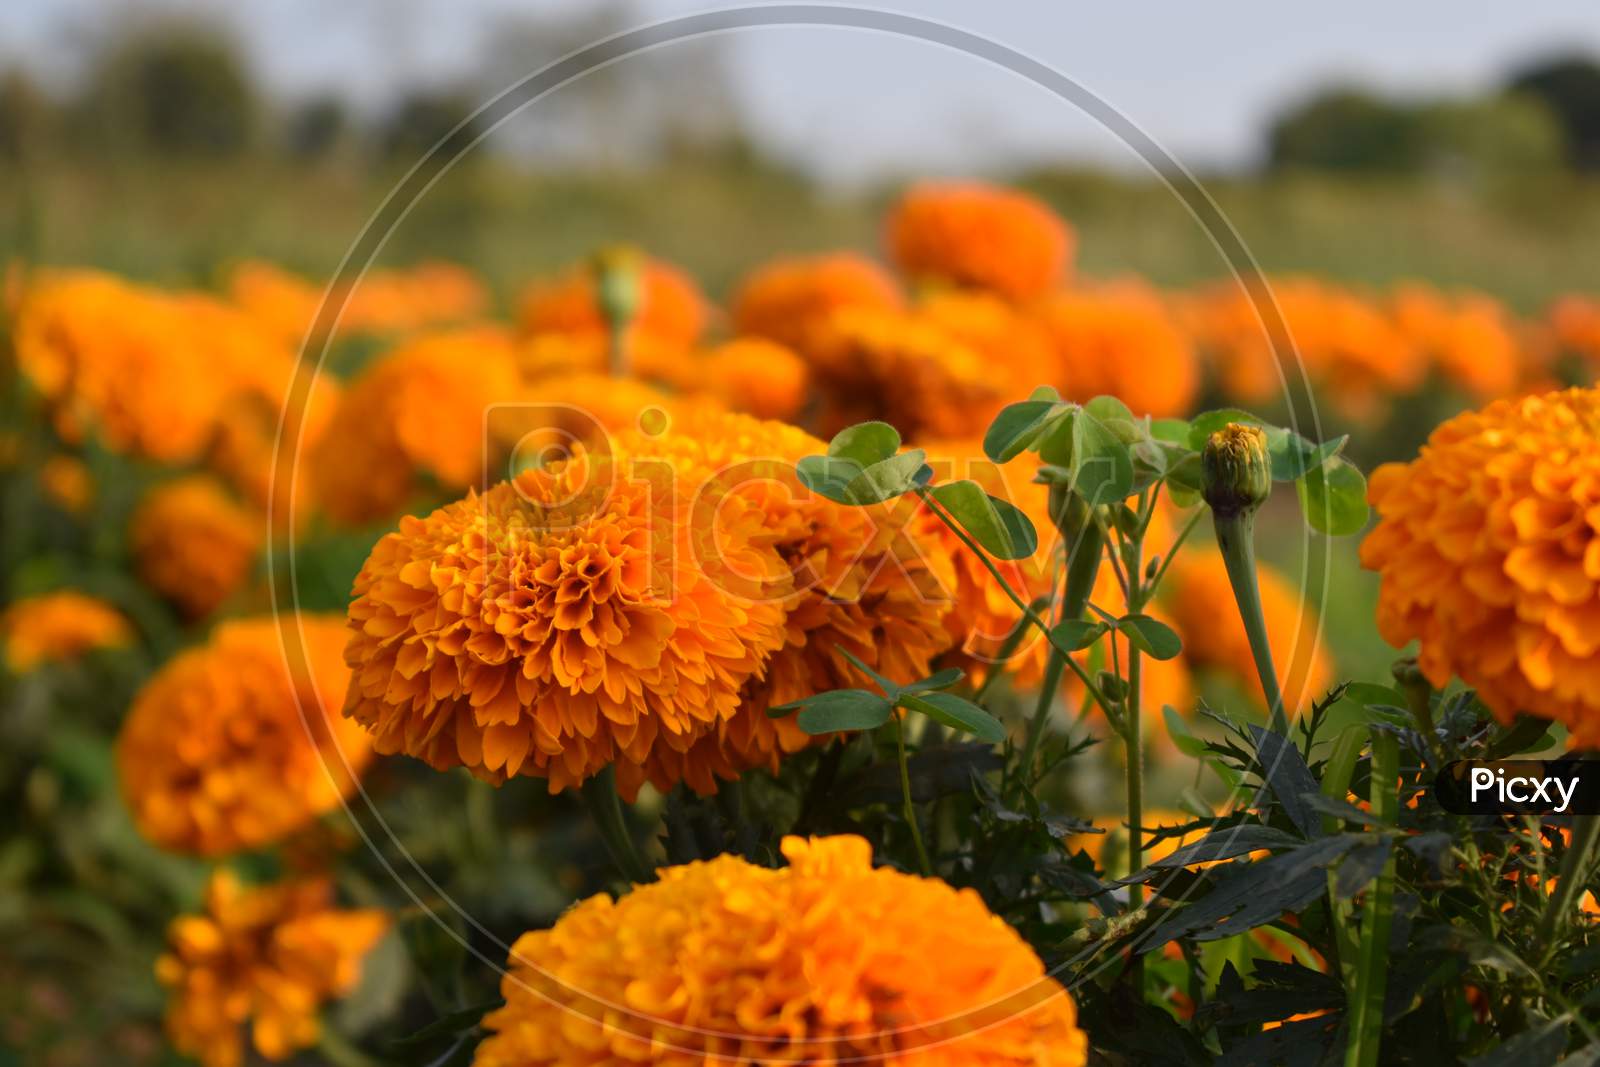 Marigolds are blooming in the field